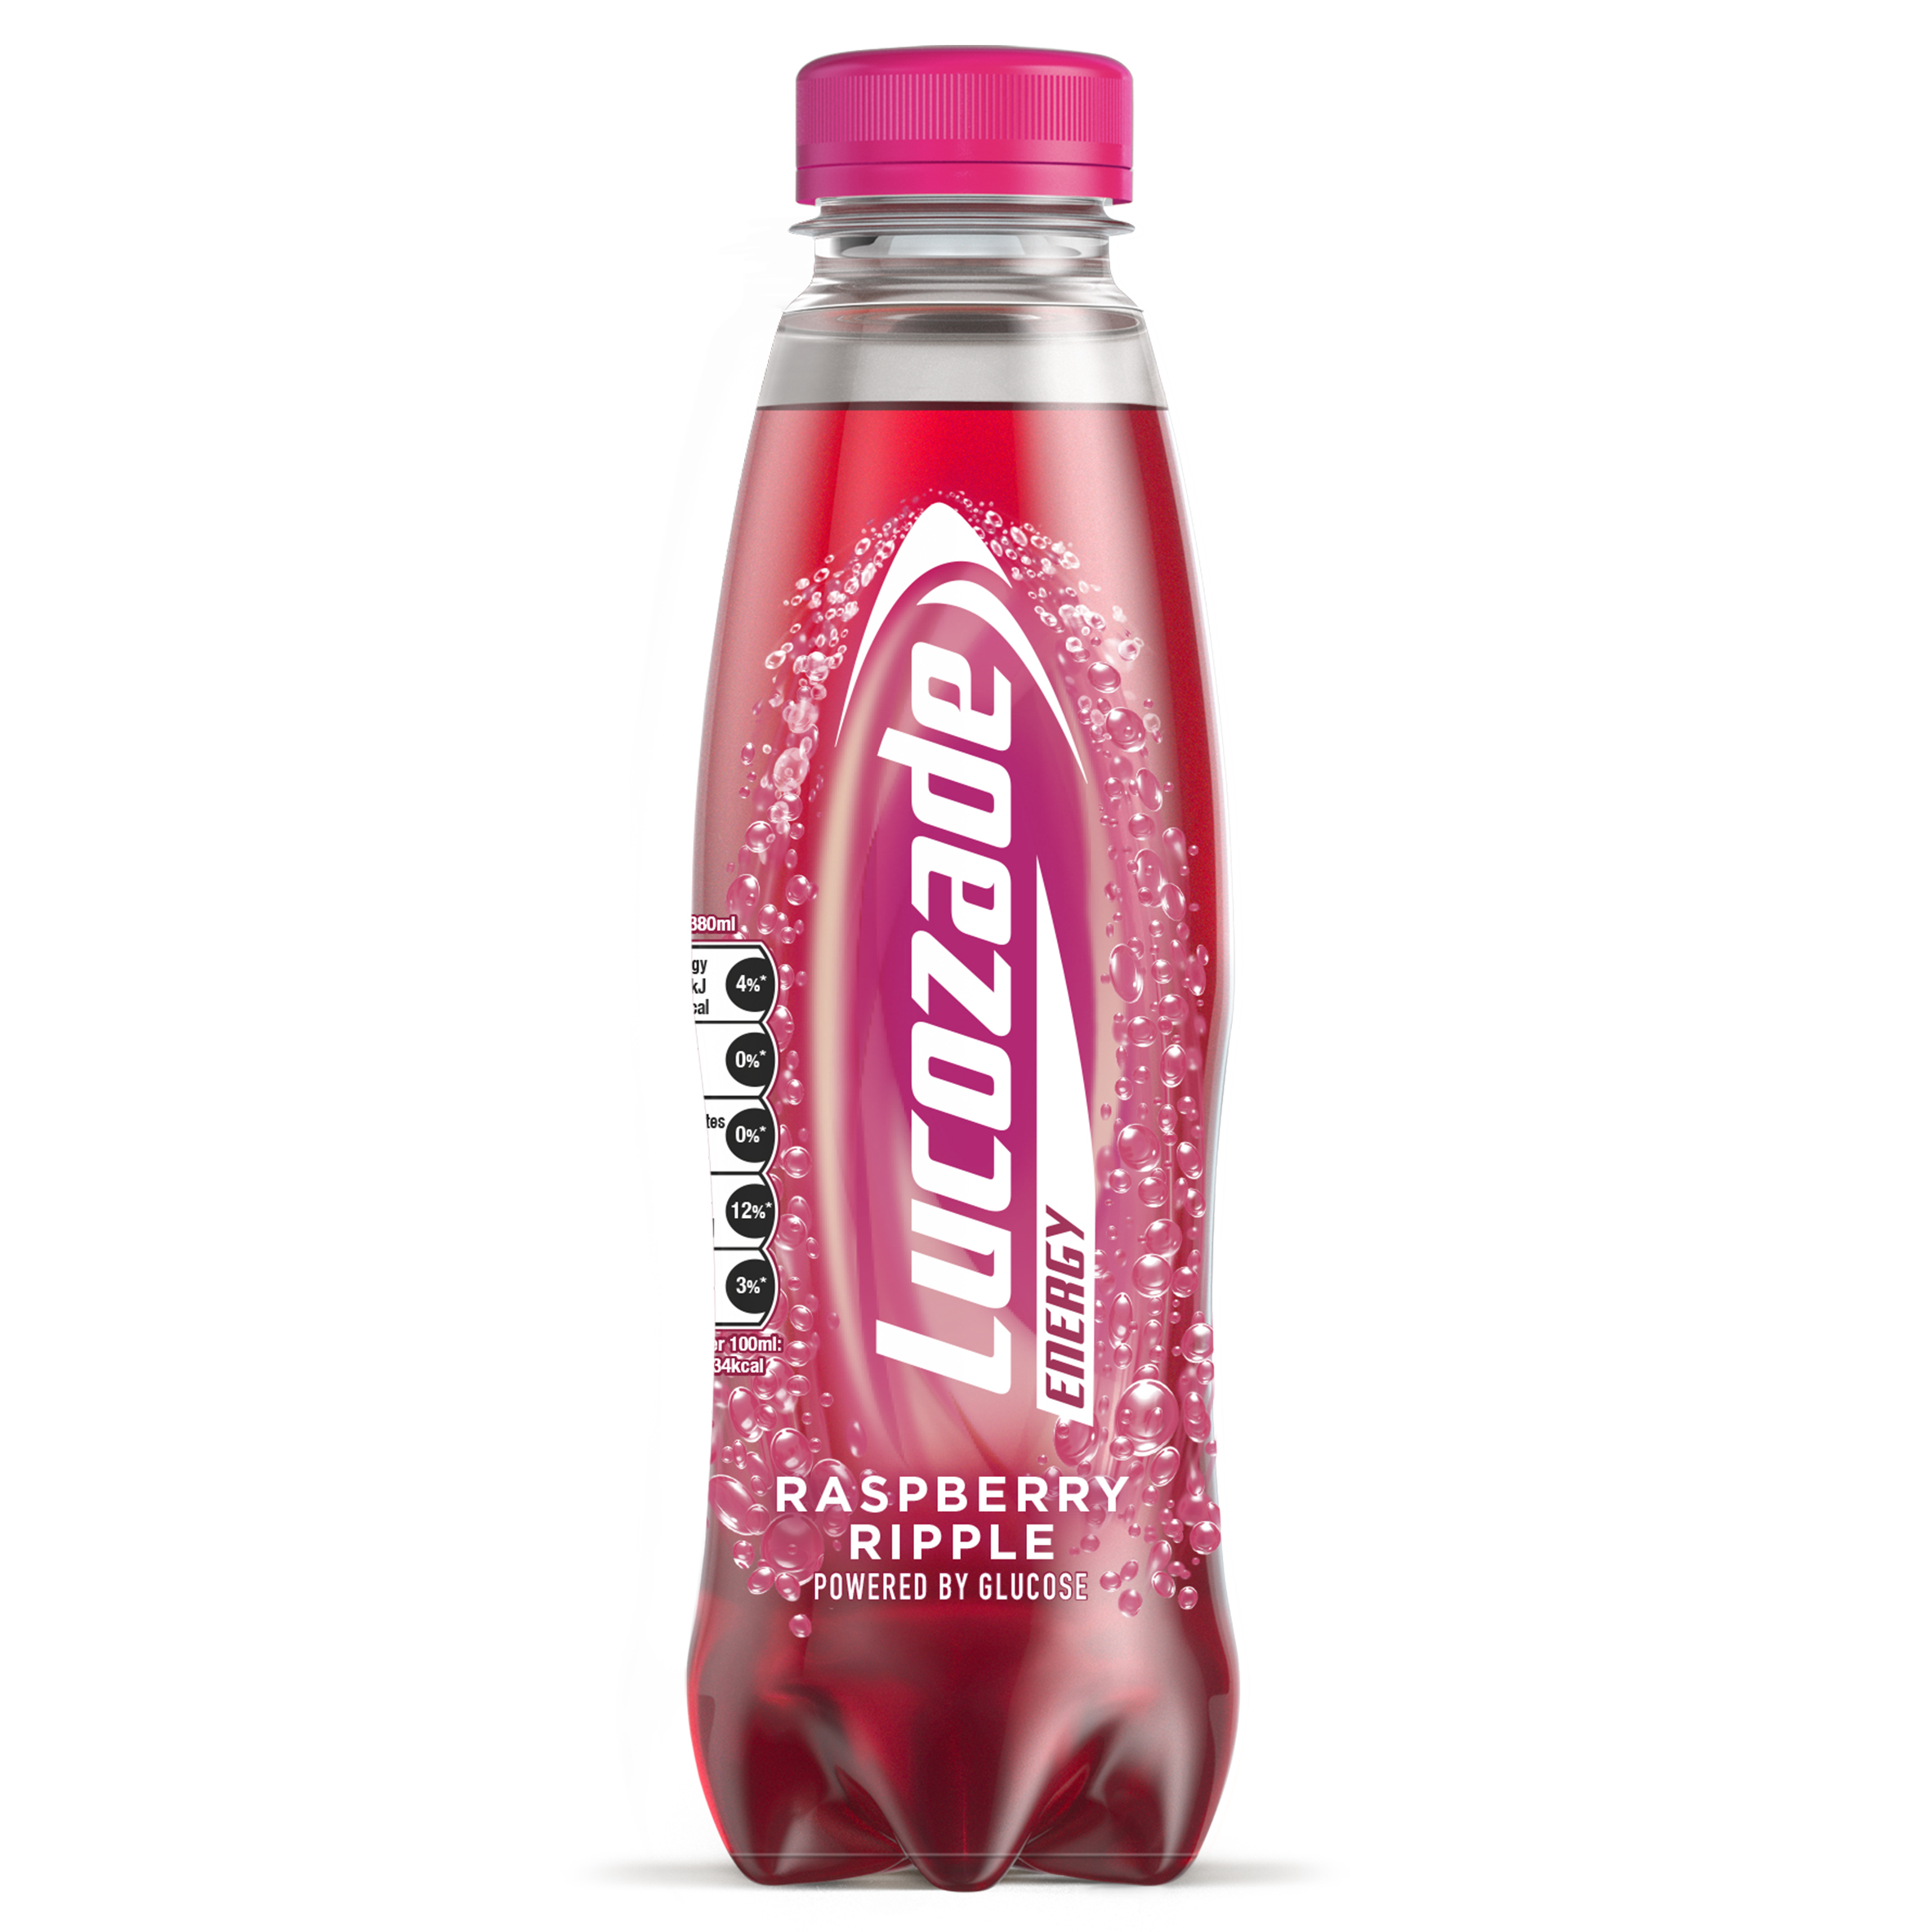 Lucozade Energy makes waves with new Raspberry Ripple launch